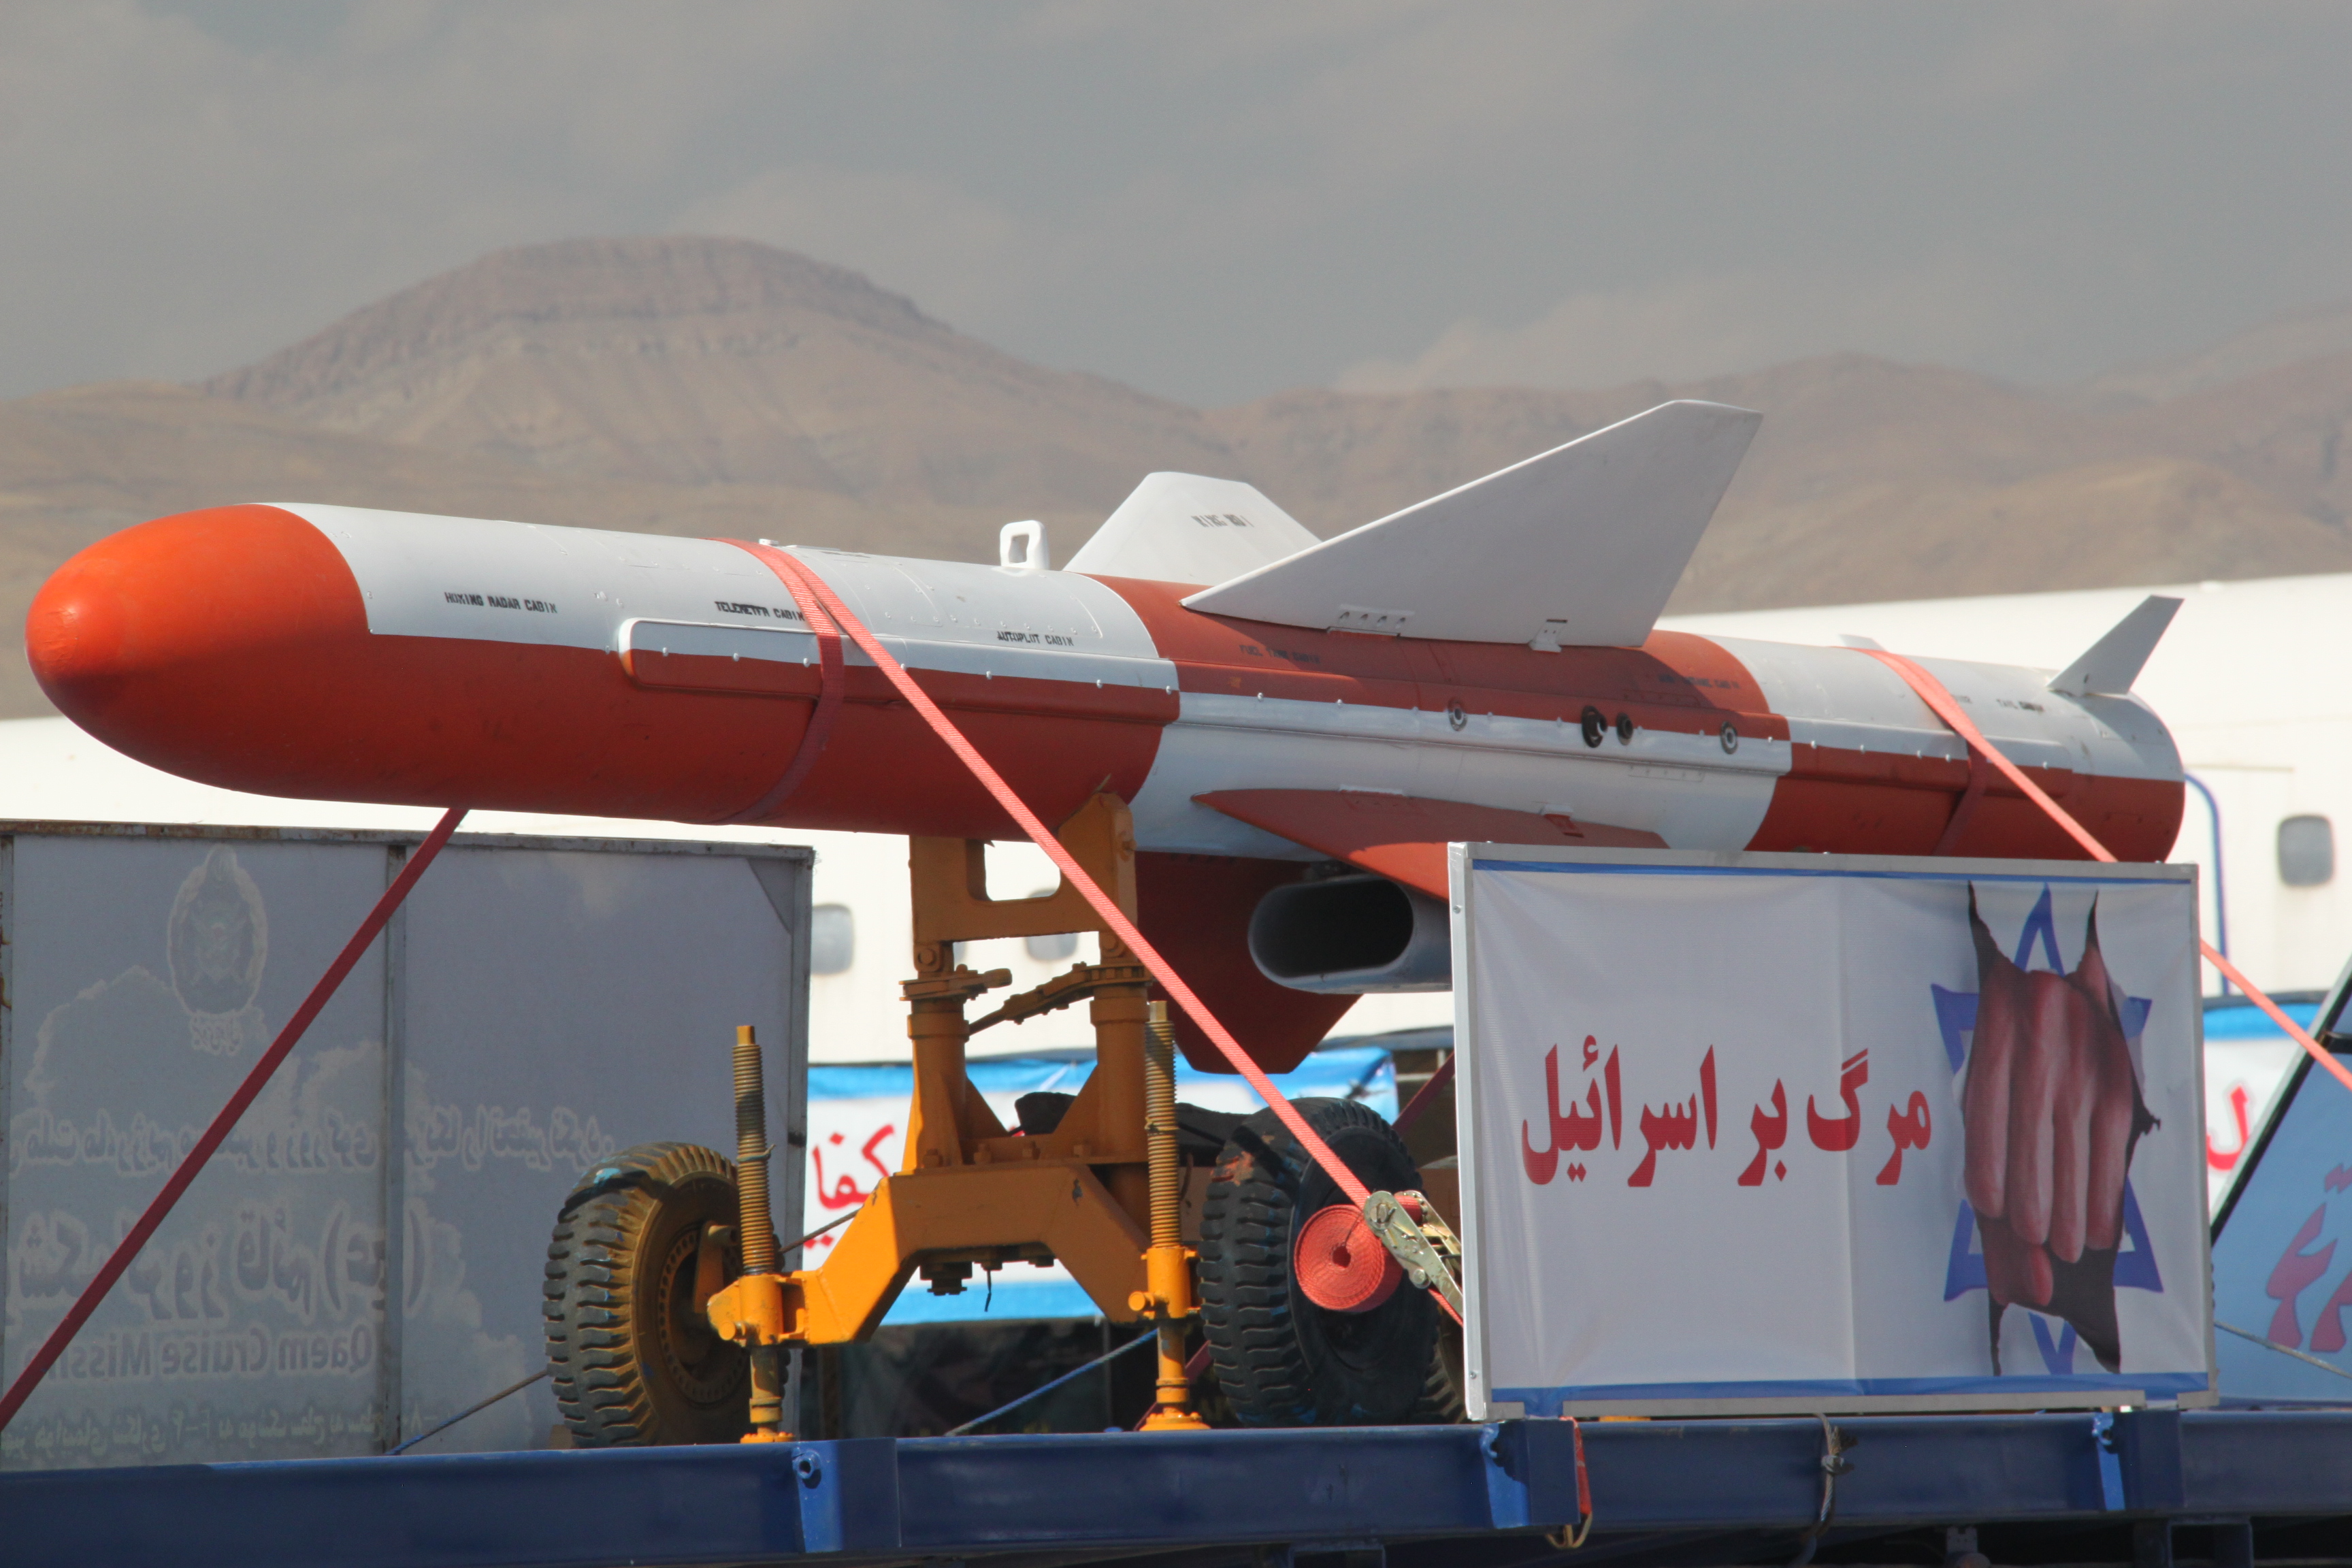 Photo above: Iranian defense industries have produced a range of anti-ship cruise missiles based on Chinese models, including this air-launched version of the C-802 Noor missile with a range of between 75 and 120 kilometers. Credit: The author’s collection.